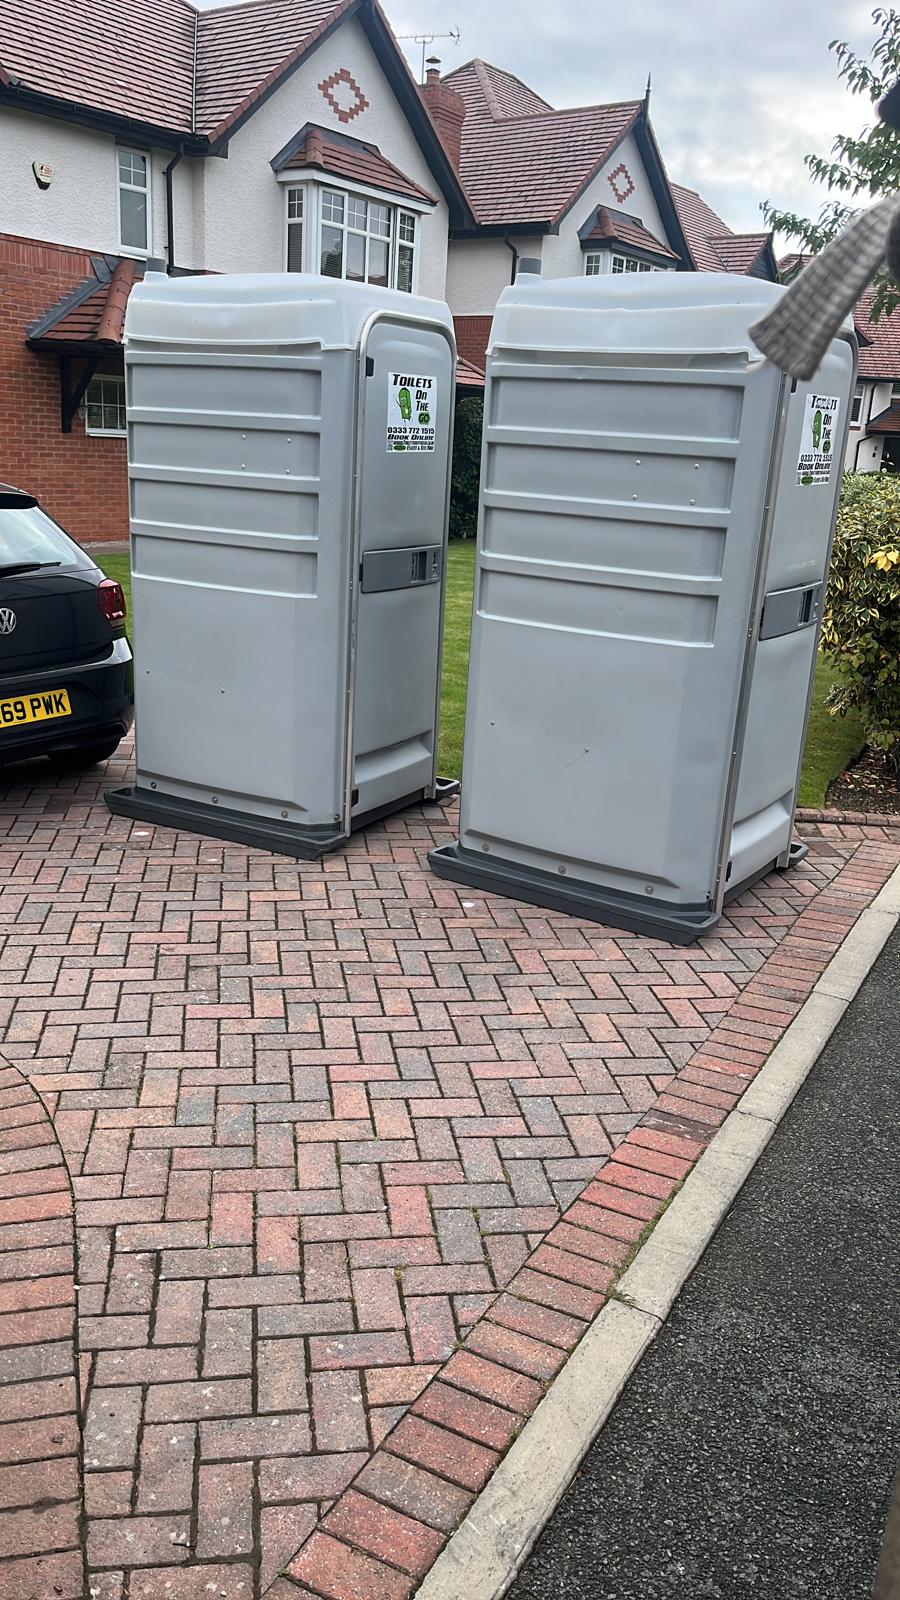 Gallery | Portable Toilet Loo Hire Rental Company in North West uk and Manchester gallery image 64